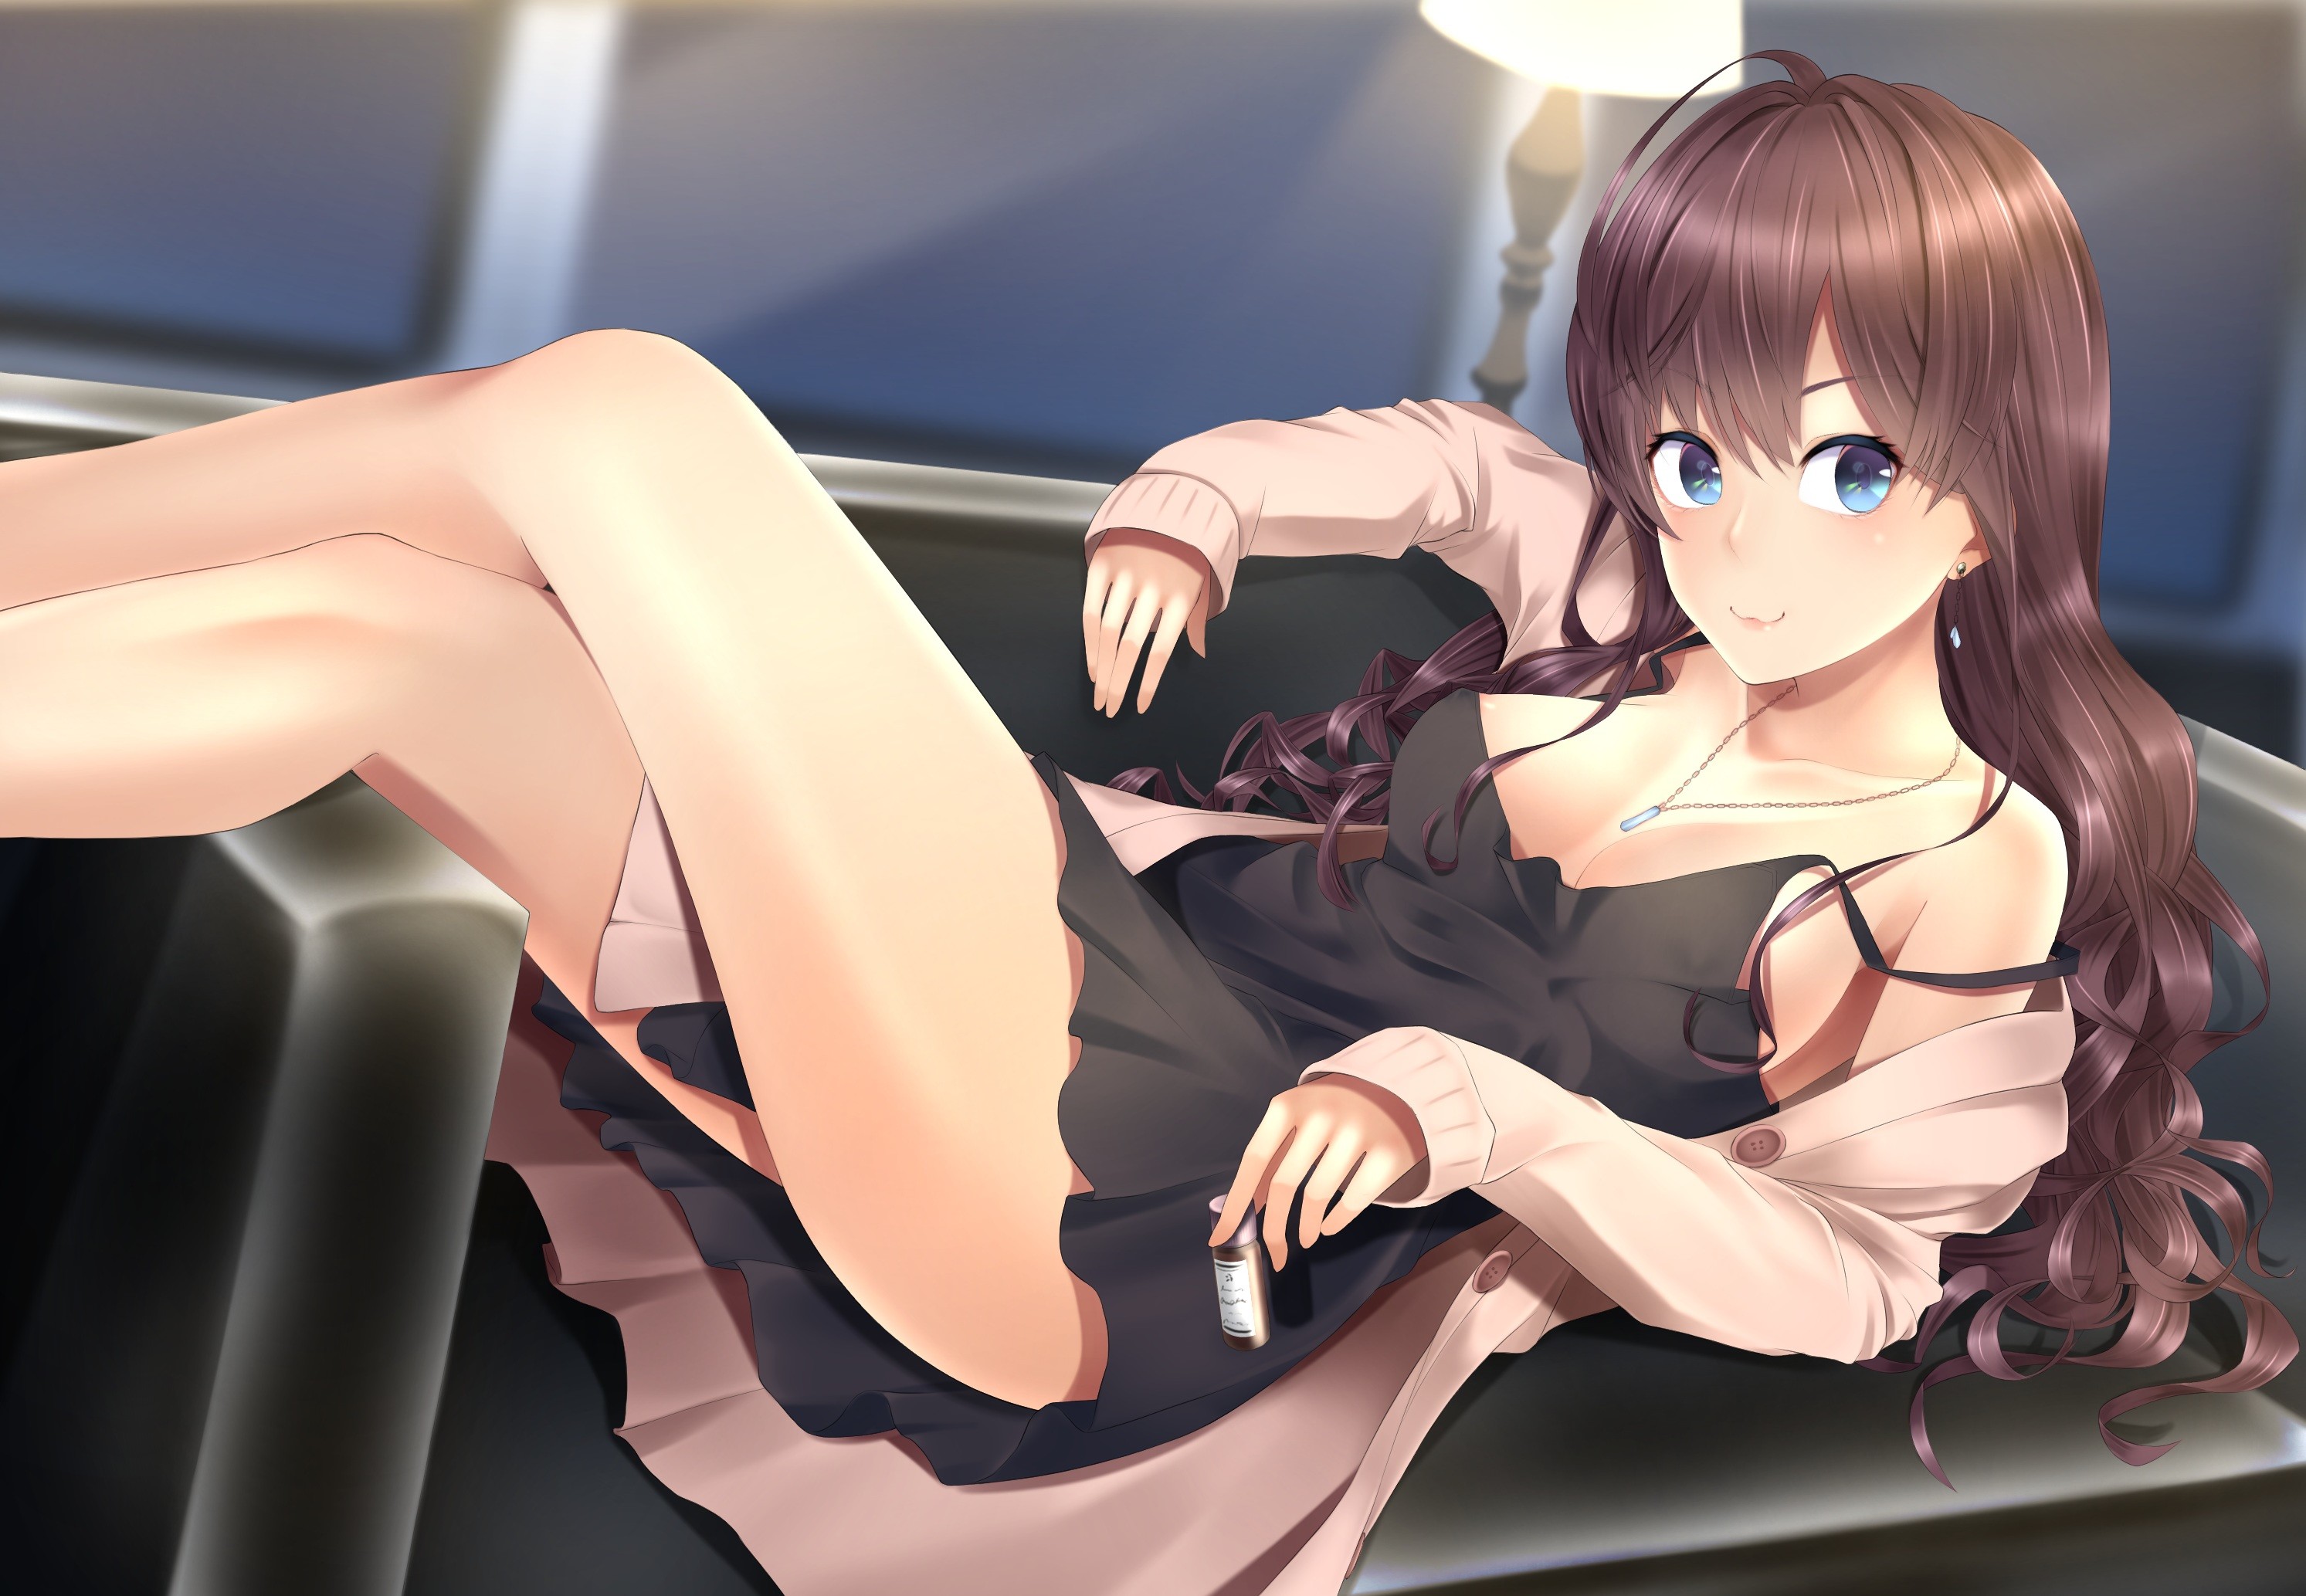 Anime 2986x2067 THE iDOLM@STER THE iDOLM@STER: Cinderella Girls Ichinose Shiki anime anime girls legs crossed brunette blue eyes legs looking at viewer women women indoors necklace boobs long hair